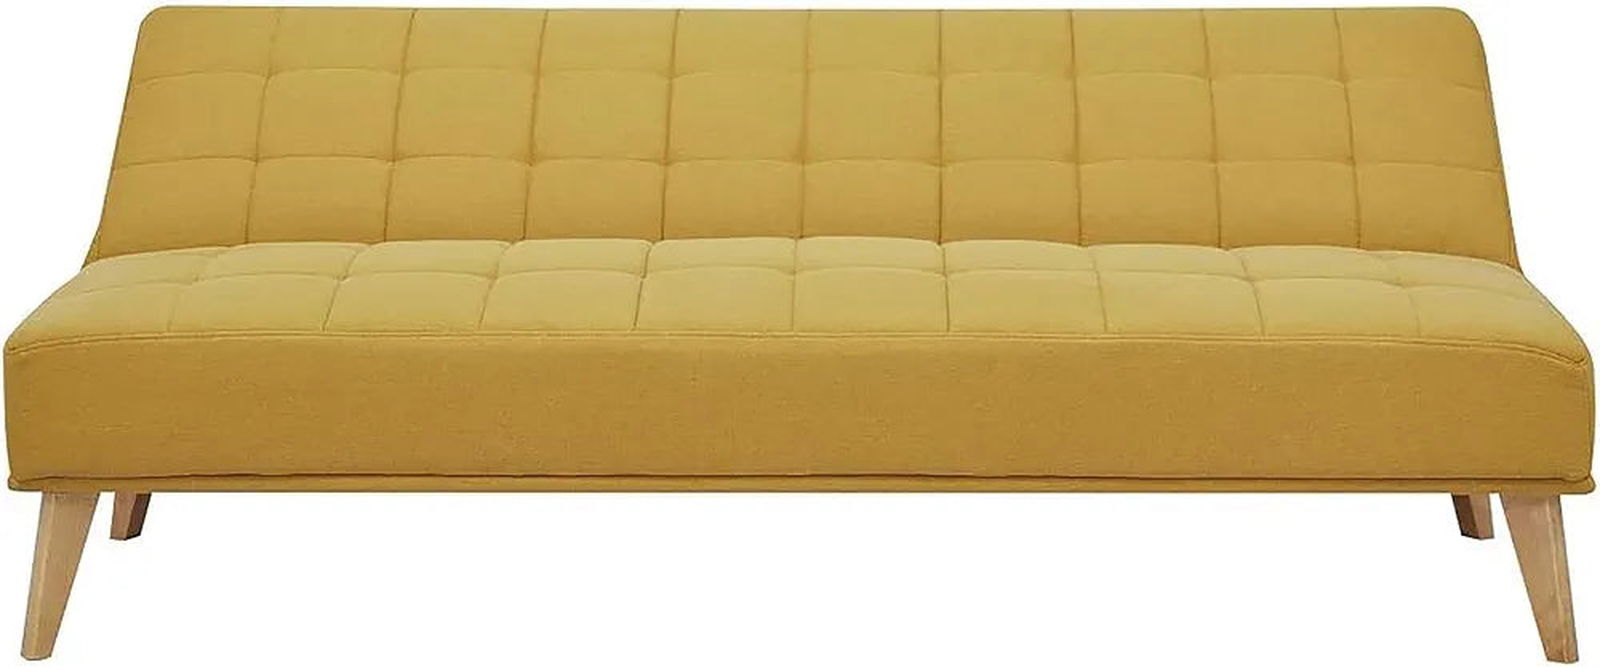 Adjustable Foldable Sofa for Living Room, Futon Sofa Bed, Convertible Sleeper Sofa with Tapered Wooden Legs, Modern Convertible Futon for Living Room